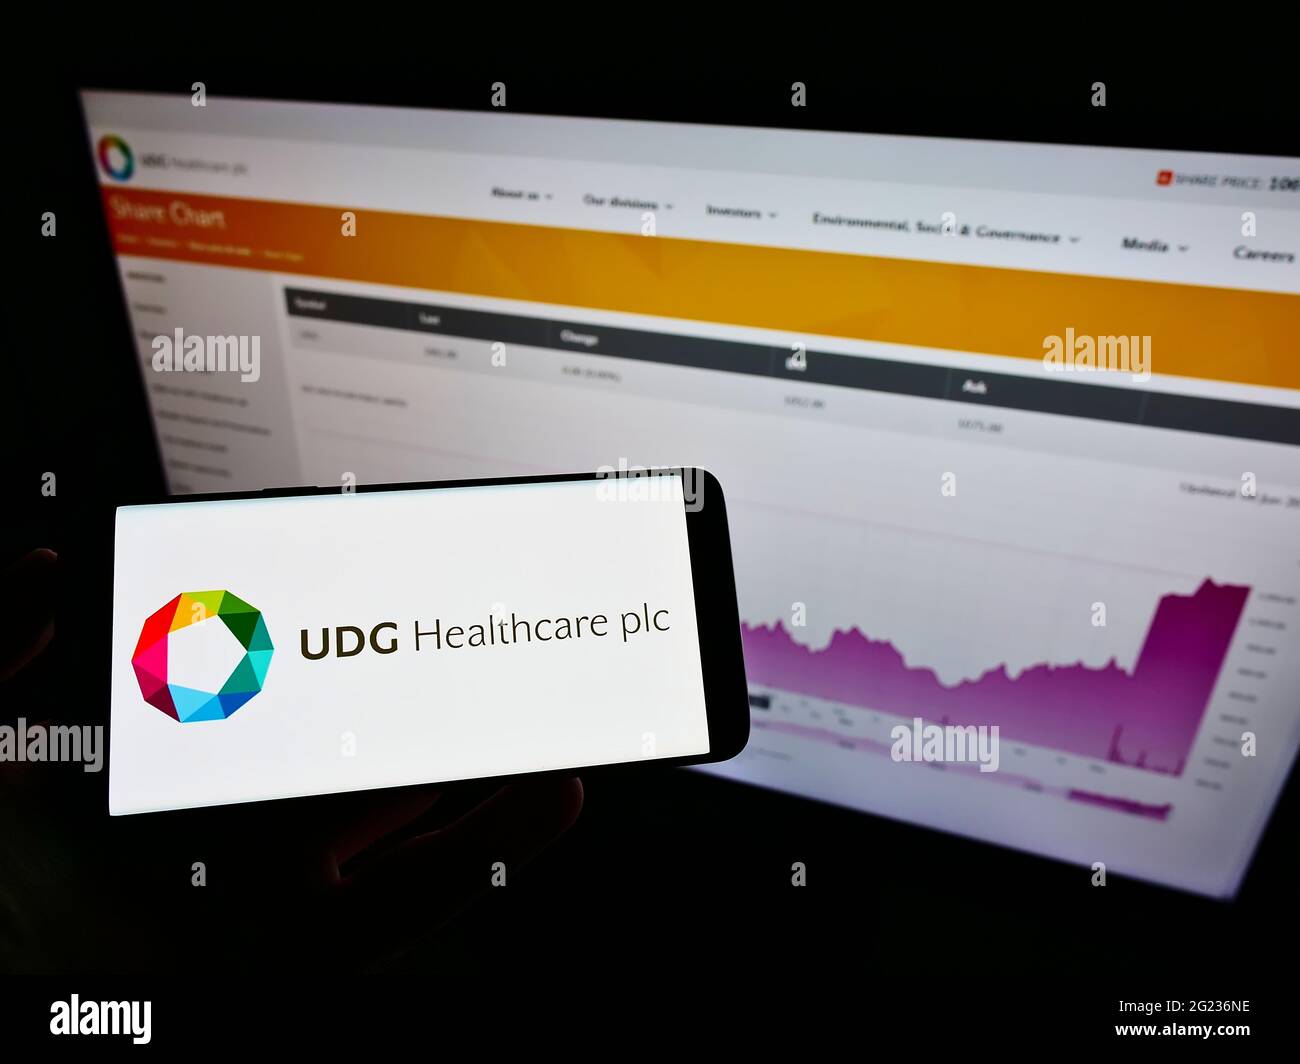 Person holding smartphone with logo of Irish pharmaceutical company UDG Healthcare plc on screen in front of website. Focus on phone display. Stock Photo